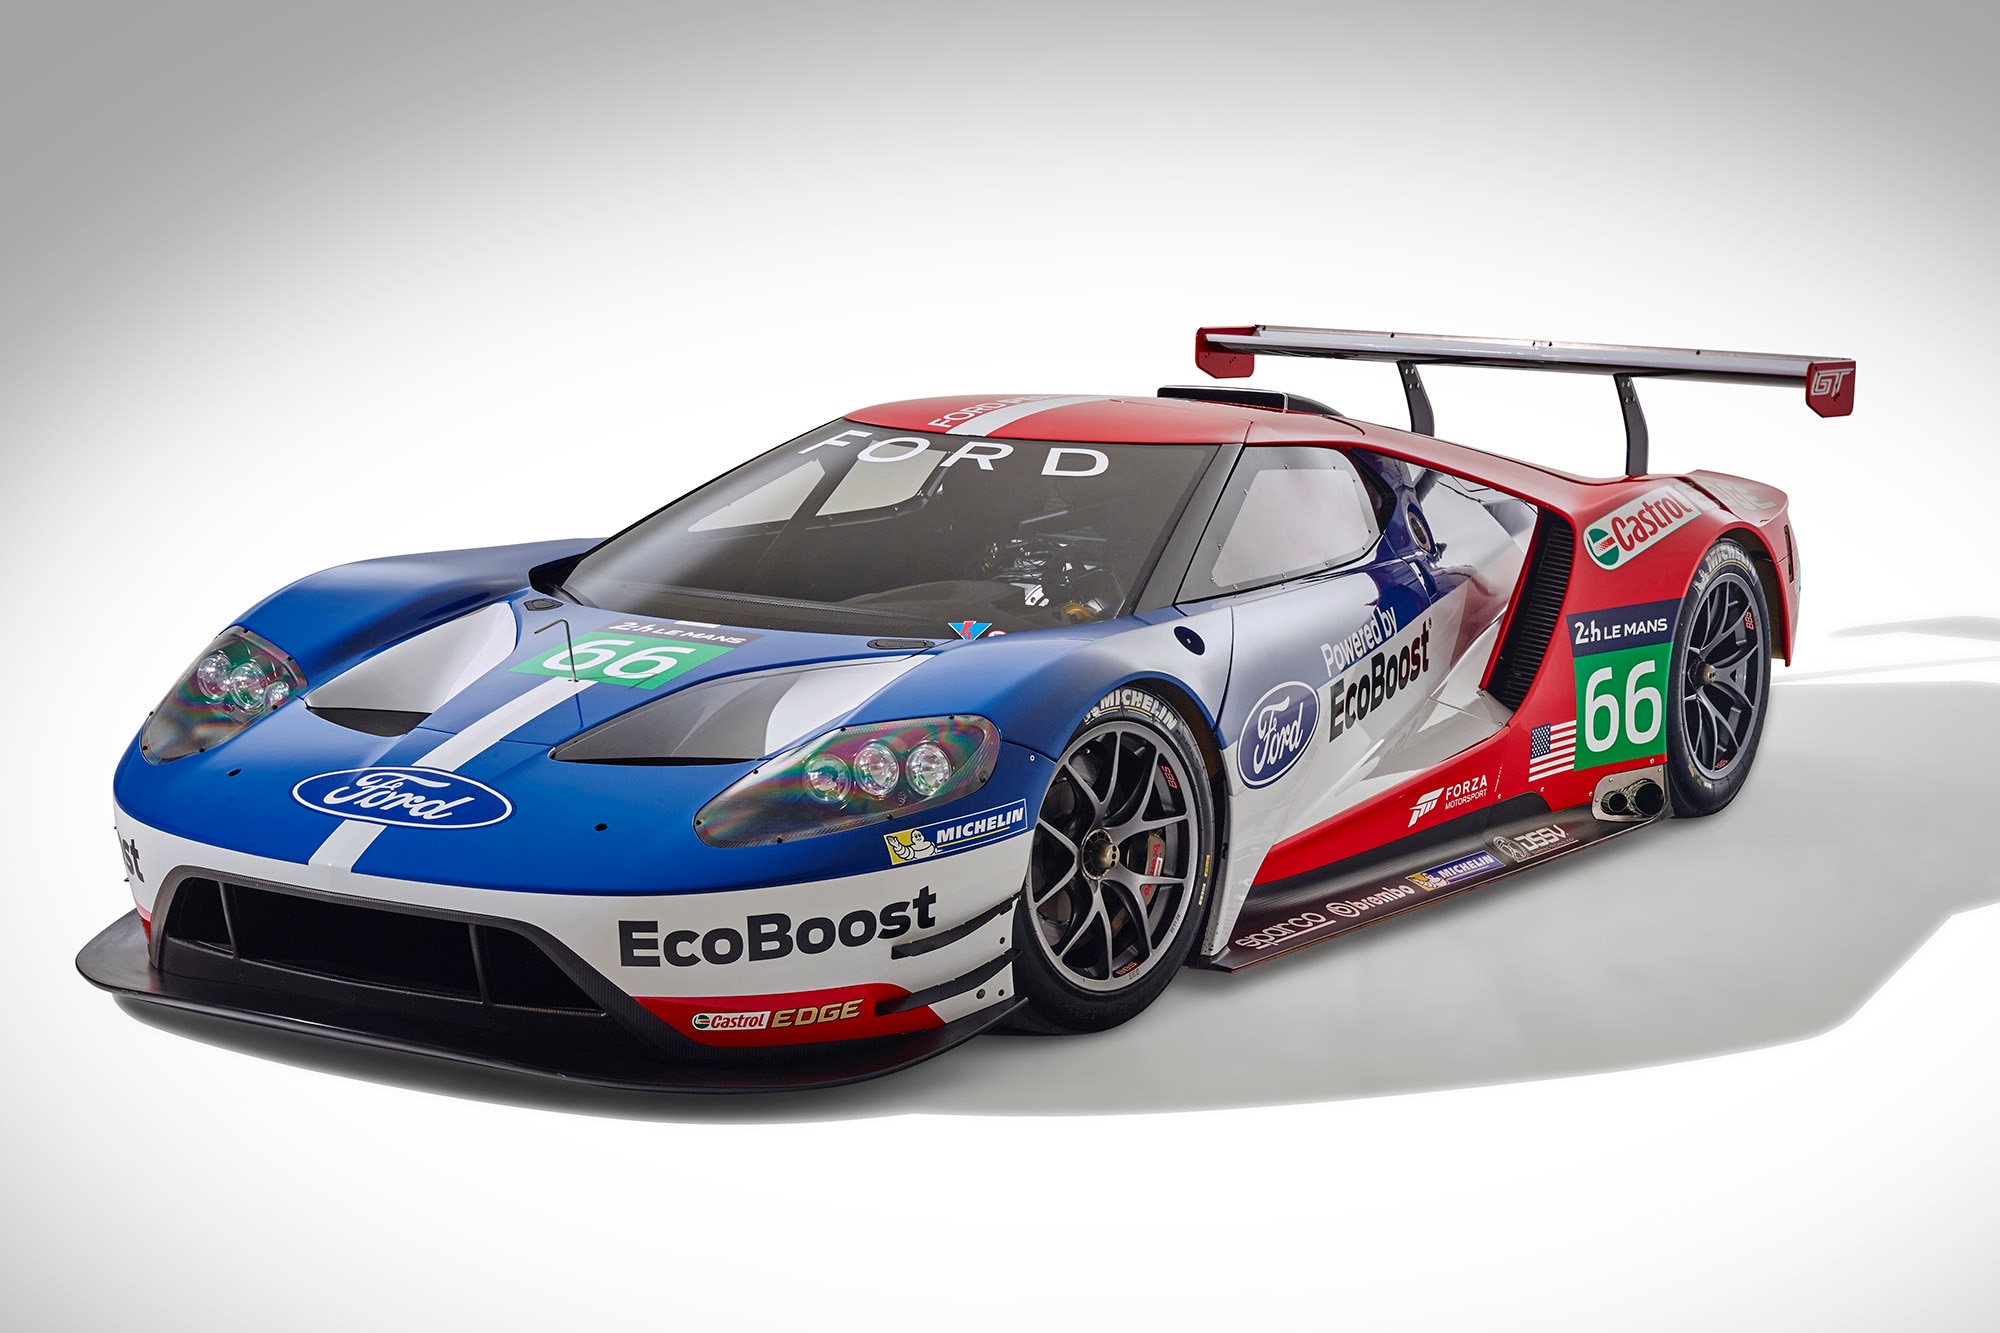 The red, white, and blue Ford GT which campaigned at Le Mans in 2016